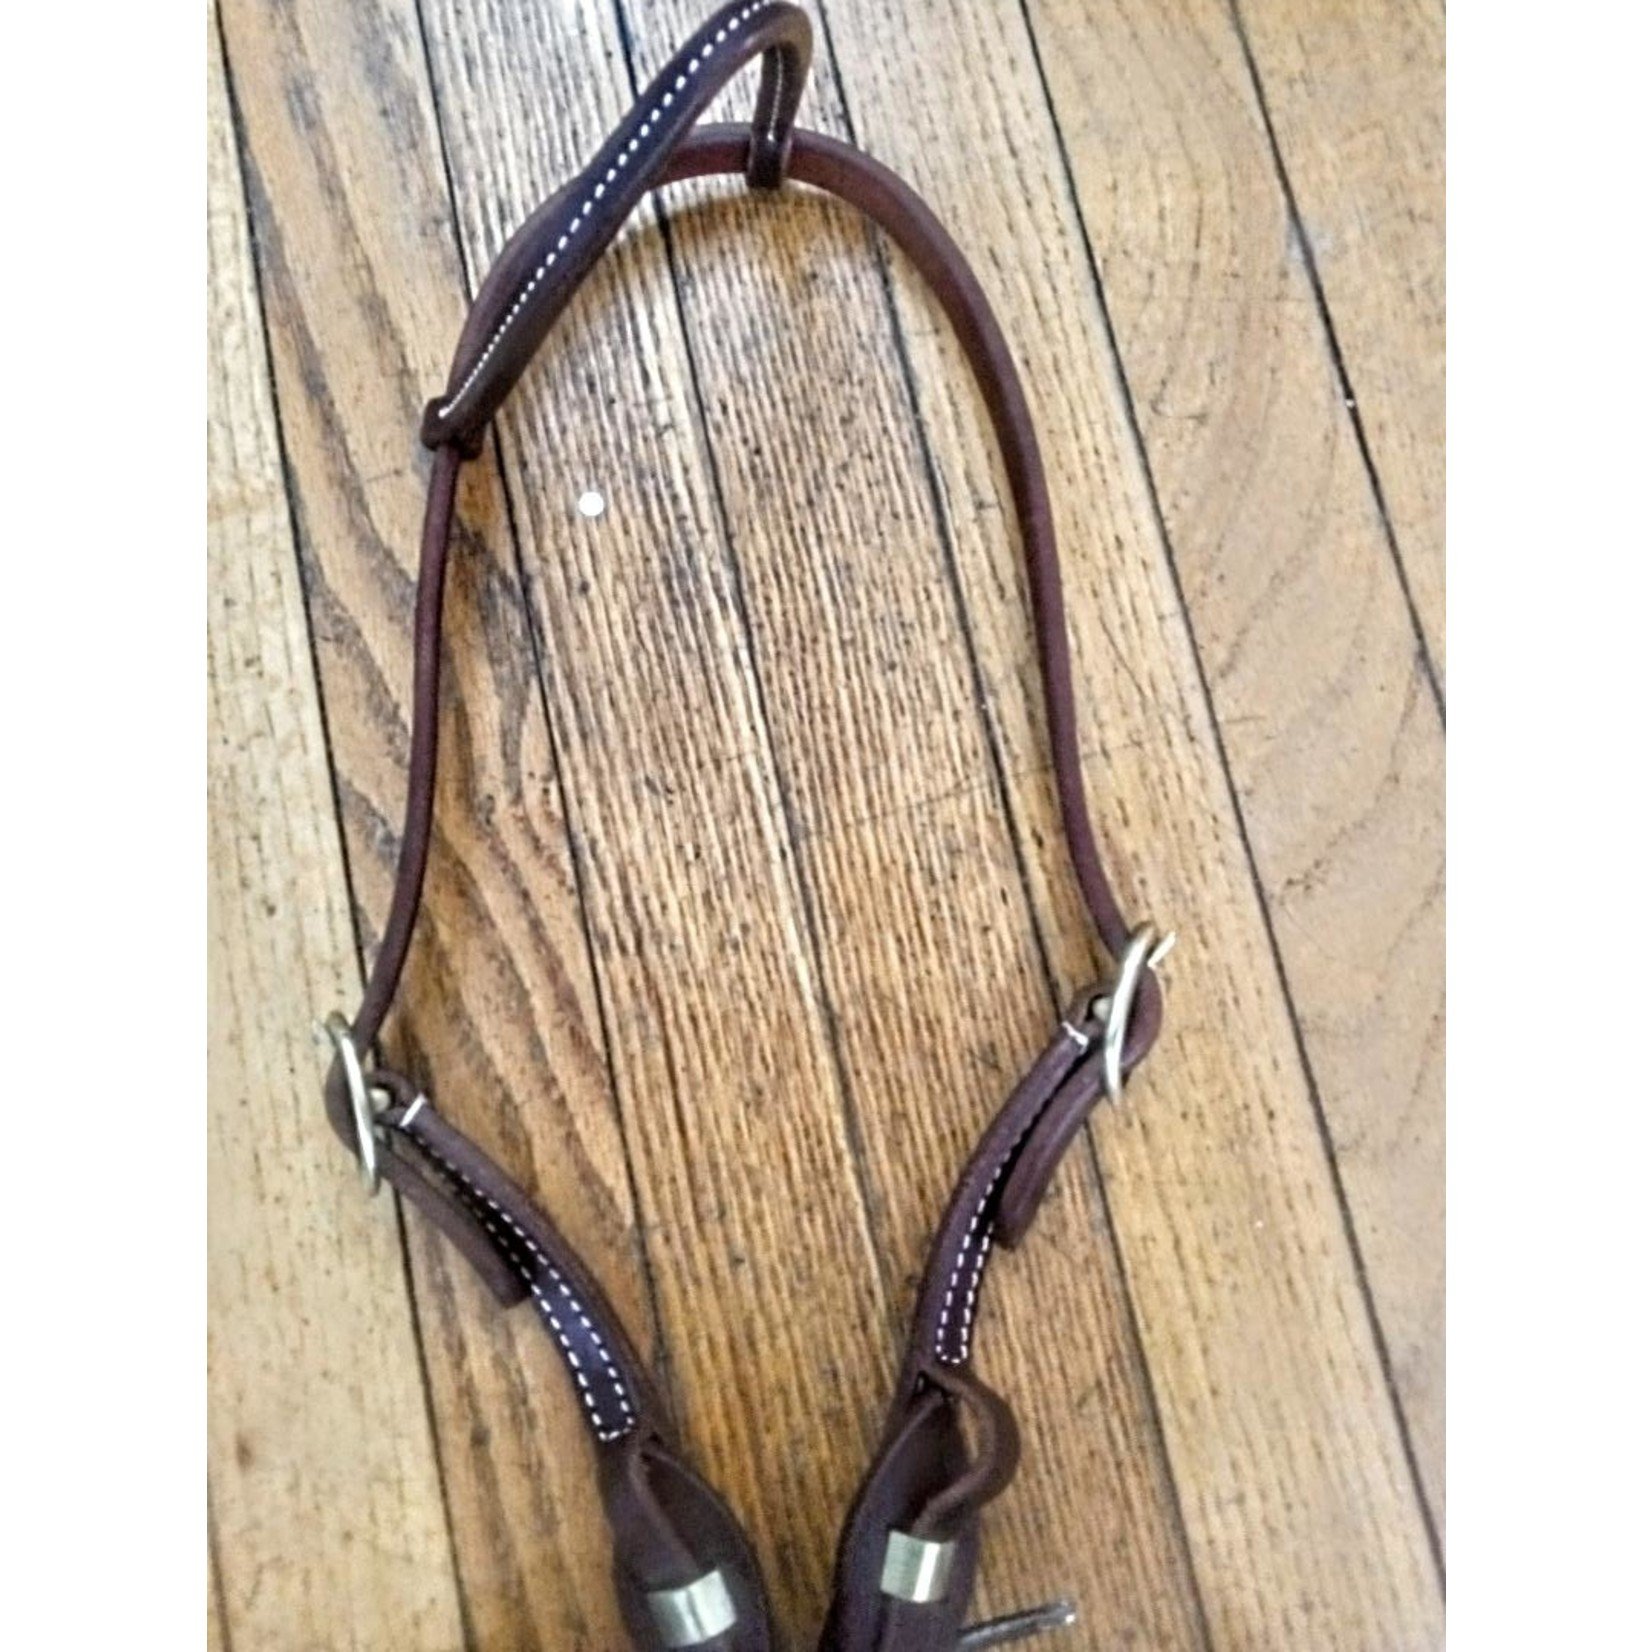 One Ear American Leather Working Headstall